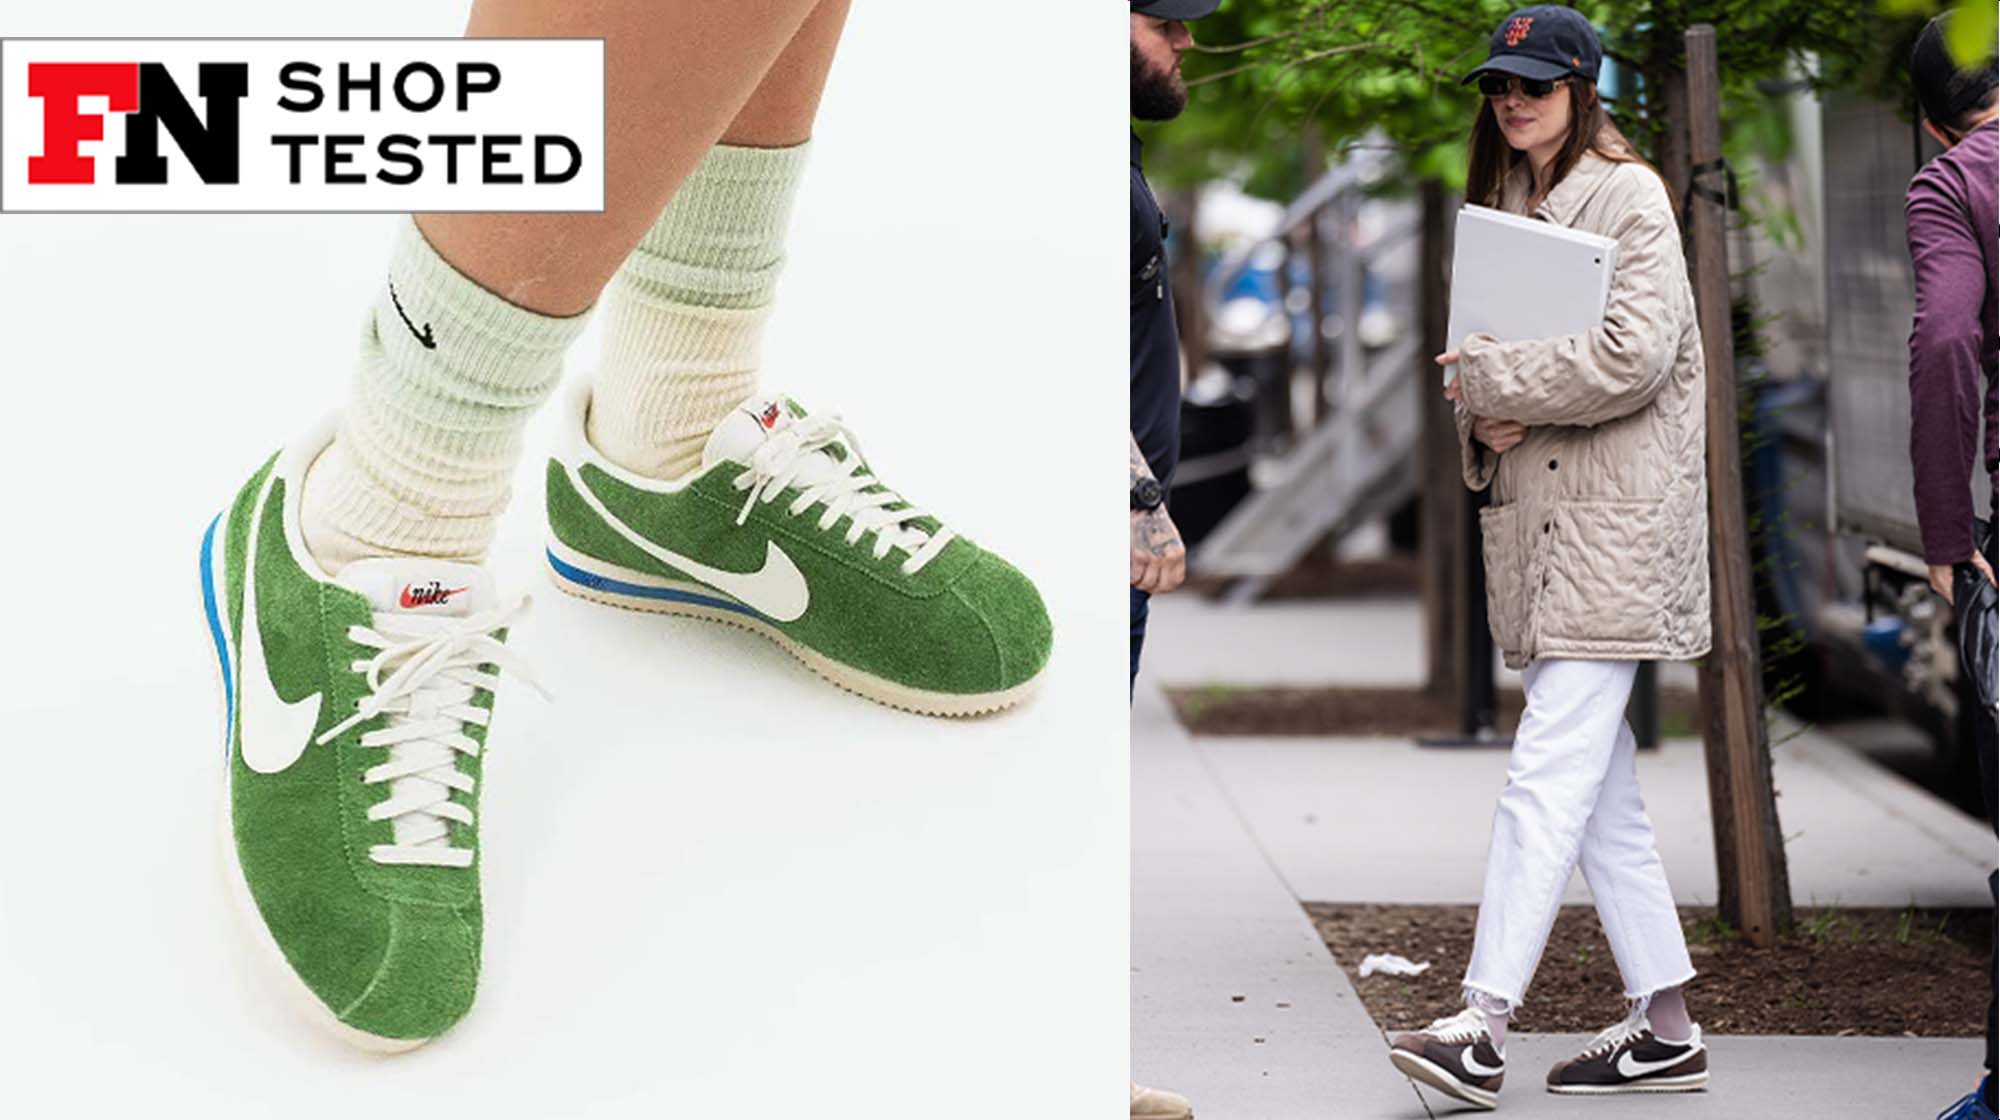 Nike’s Secret Sale Has Deals on Cortez Sneakers That Are Celeb-Loved and Trending for Summer